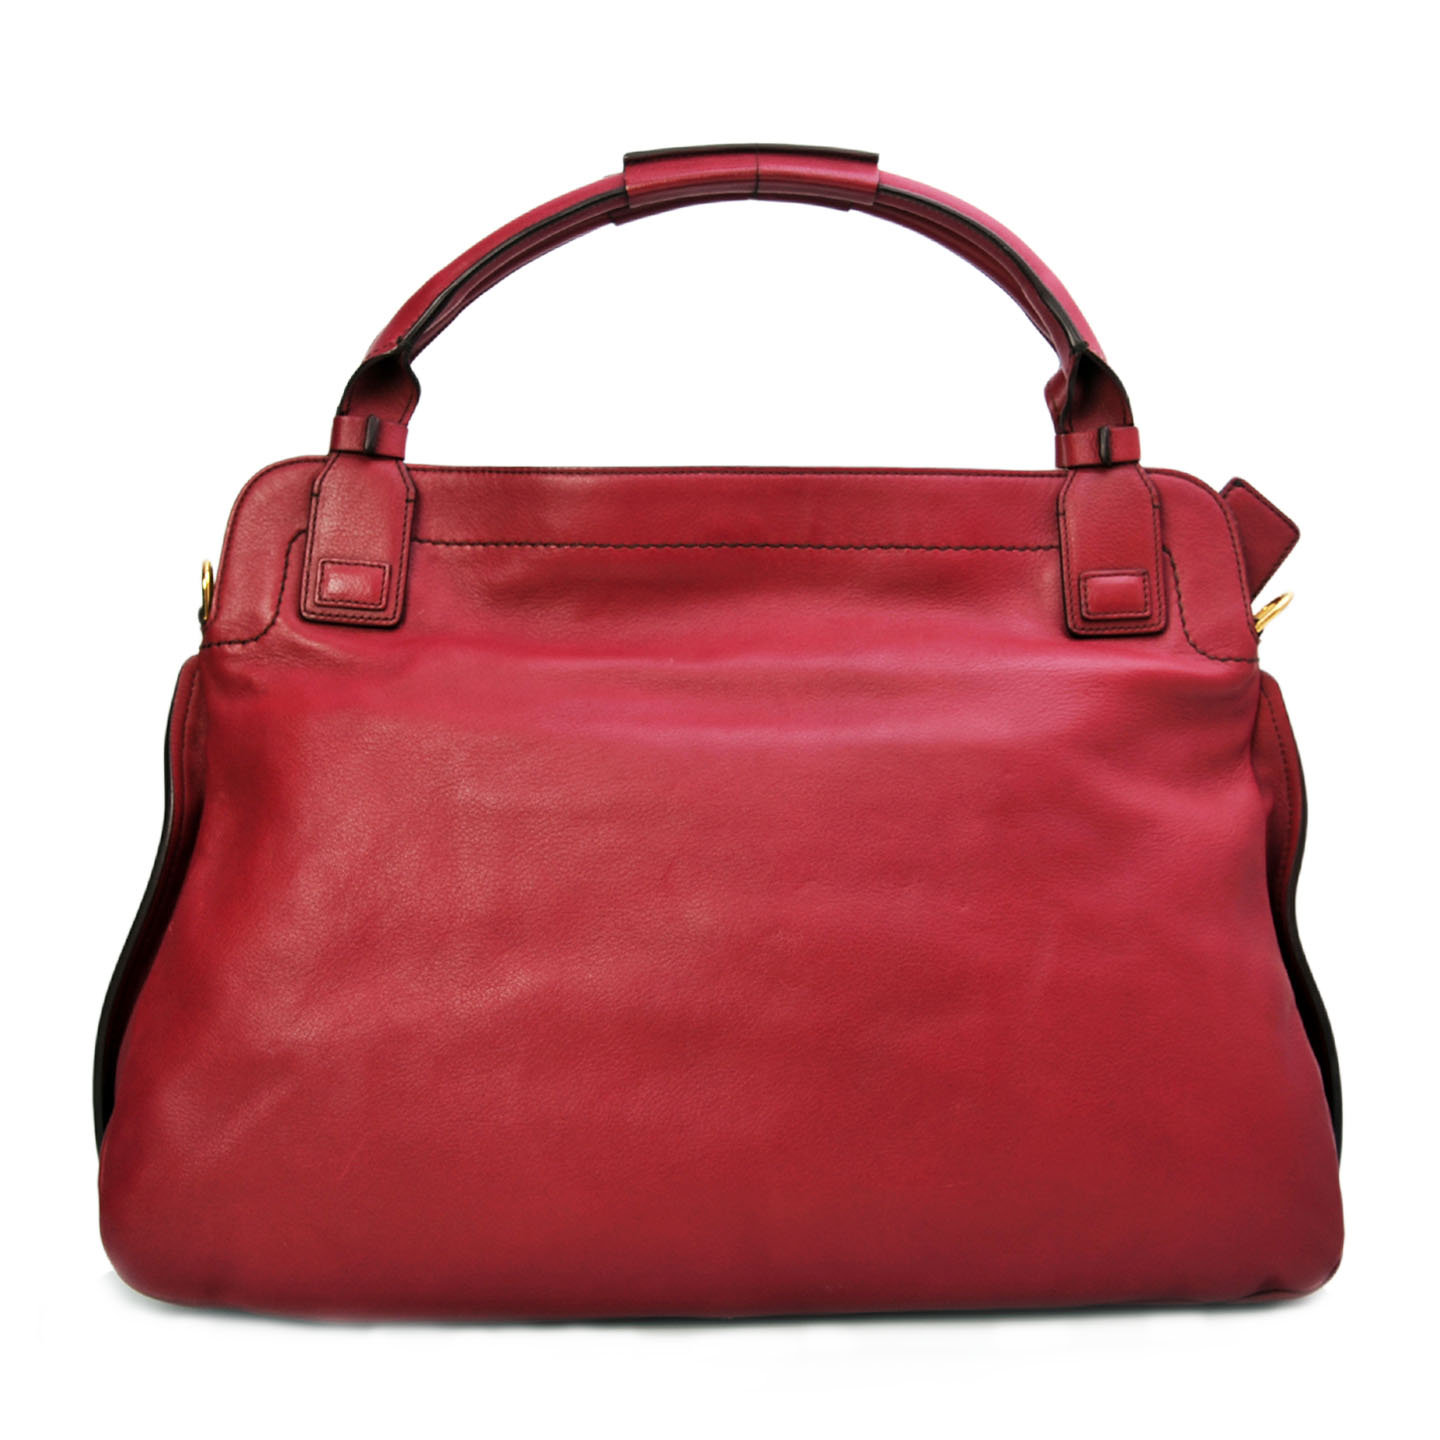 Chloe Deep Pink Leather Satchel - LabelCentric